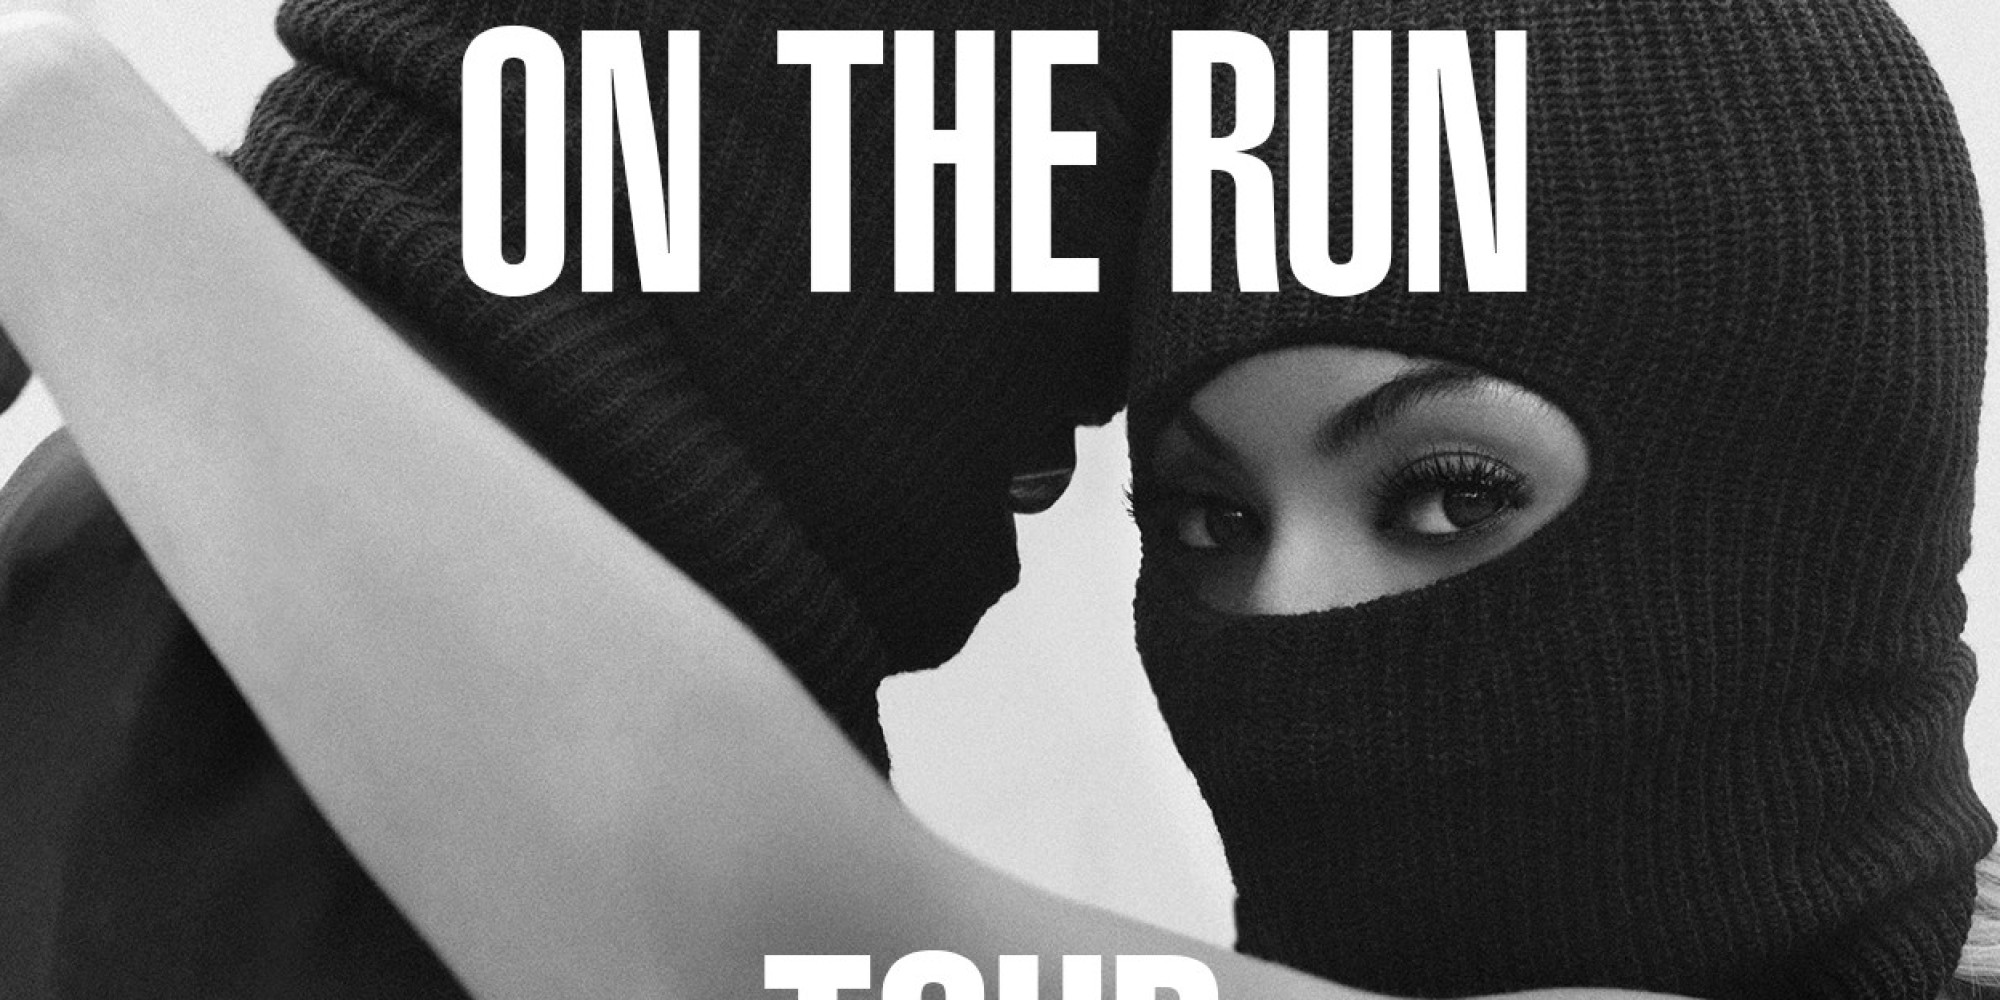 jay z ft beyonce on the run part 2 free mp3 download